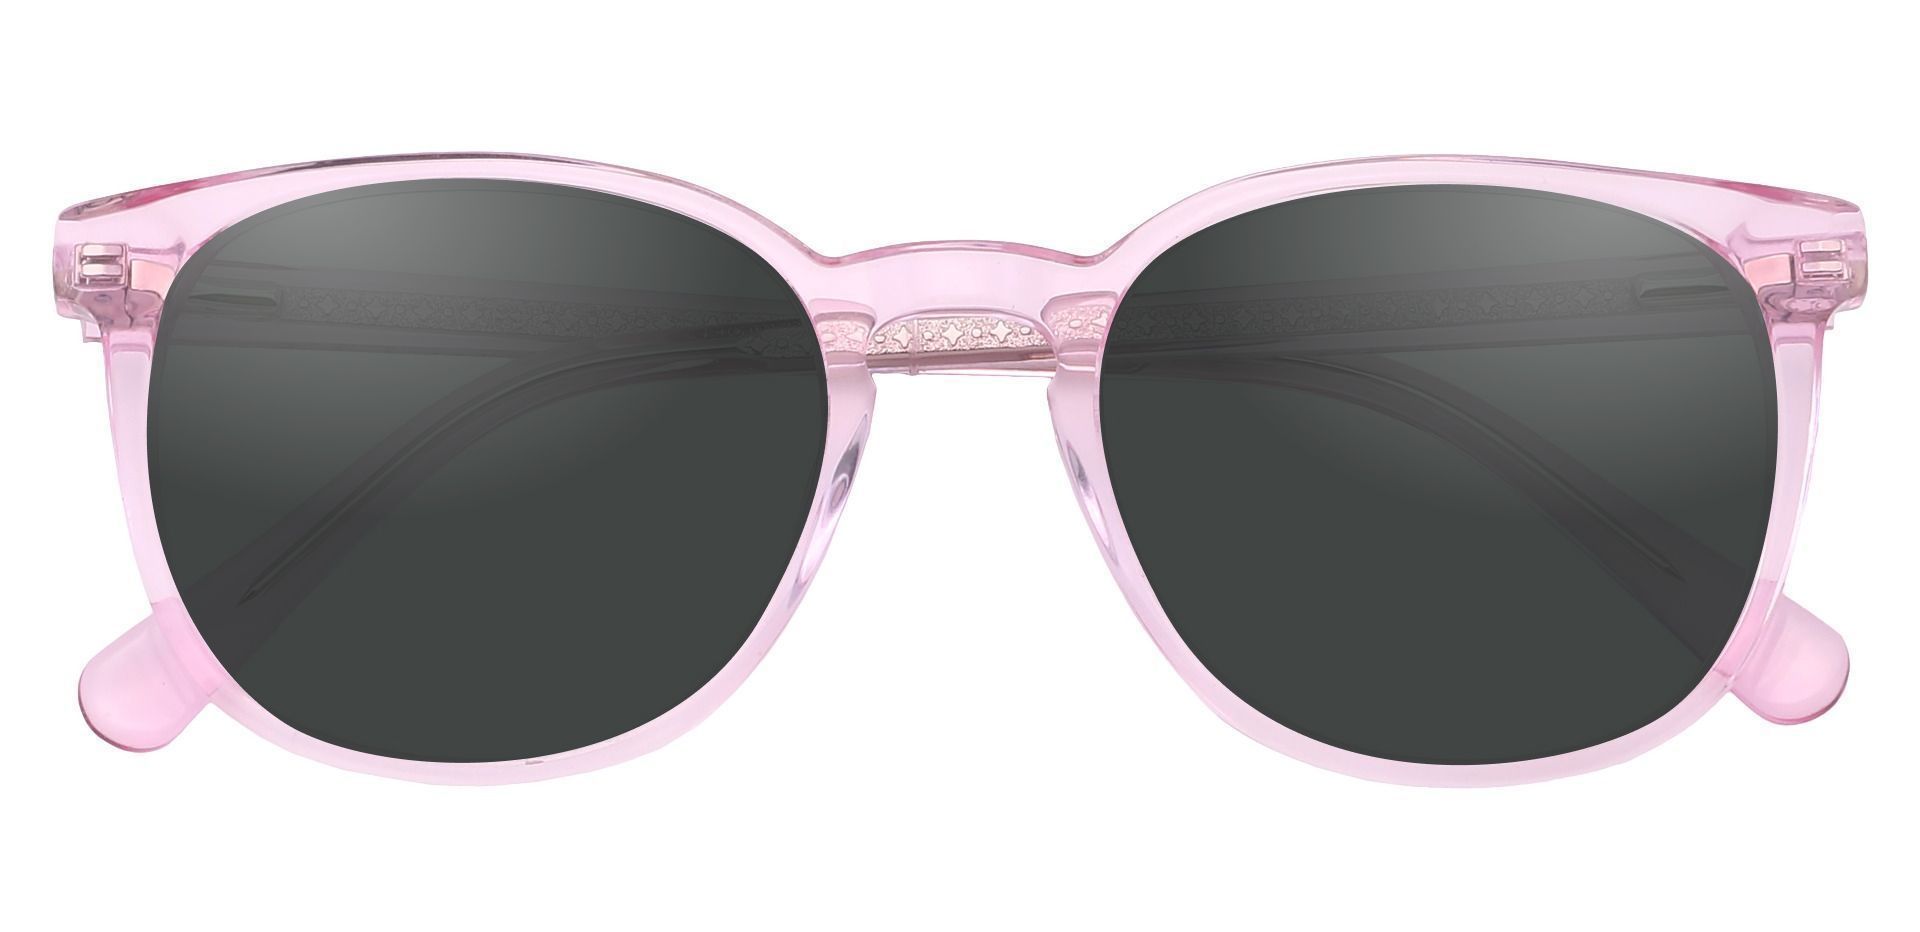 Nebula Round Non-Rx Sunglasses - Pink Frame With Gray Lenses